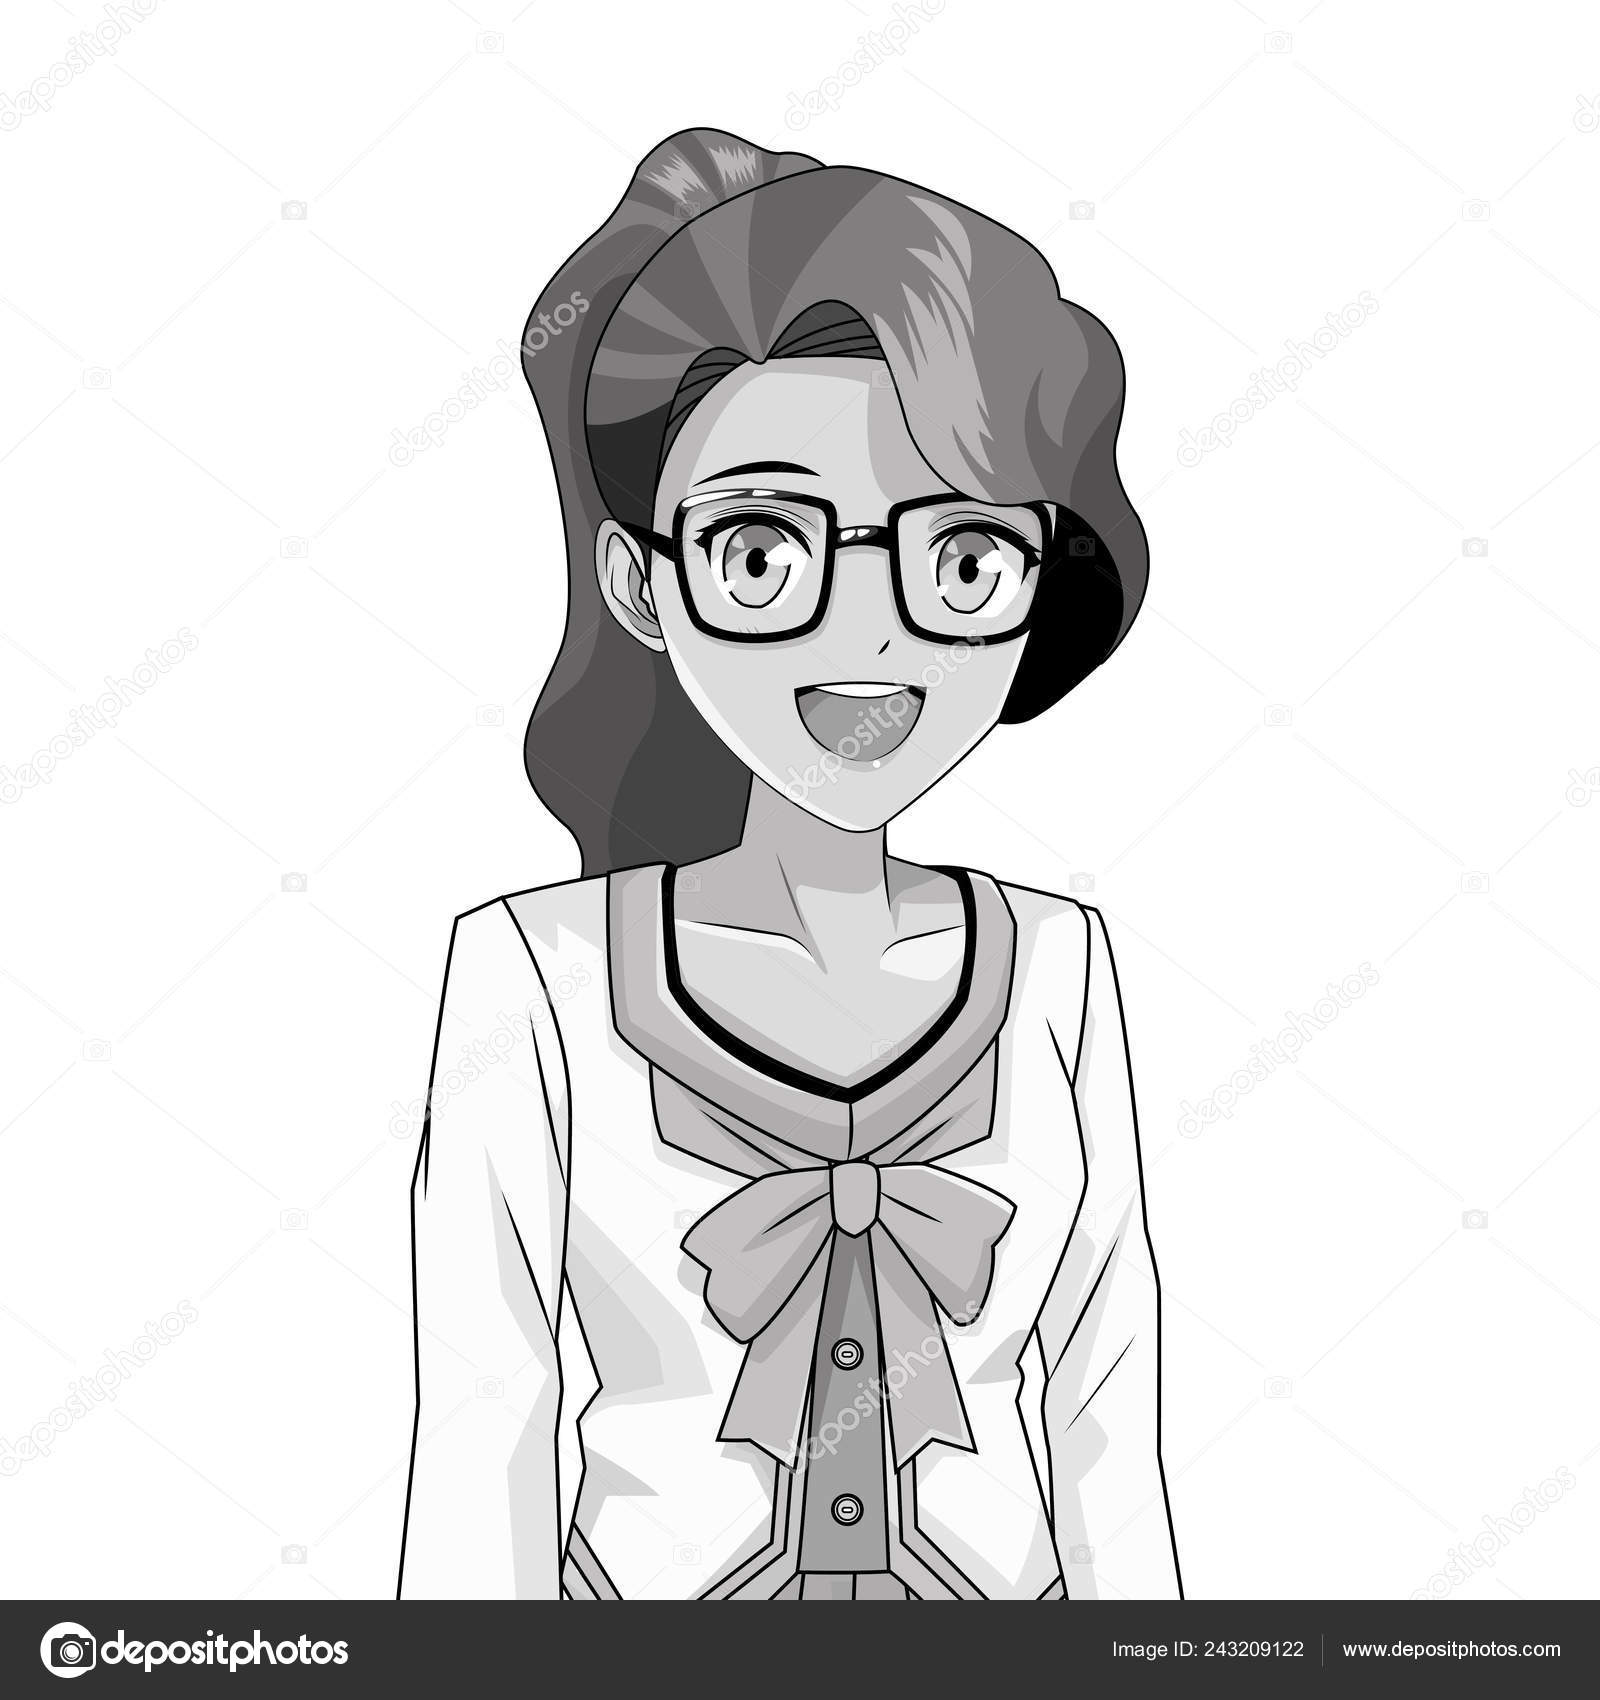 illustration of anime girl with glasses Stock Photo